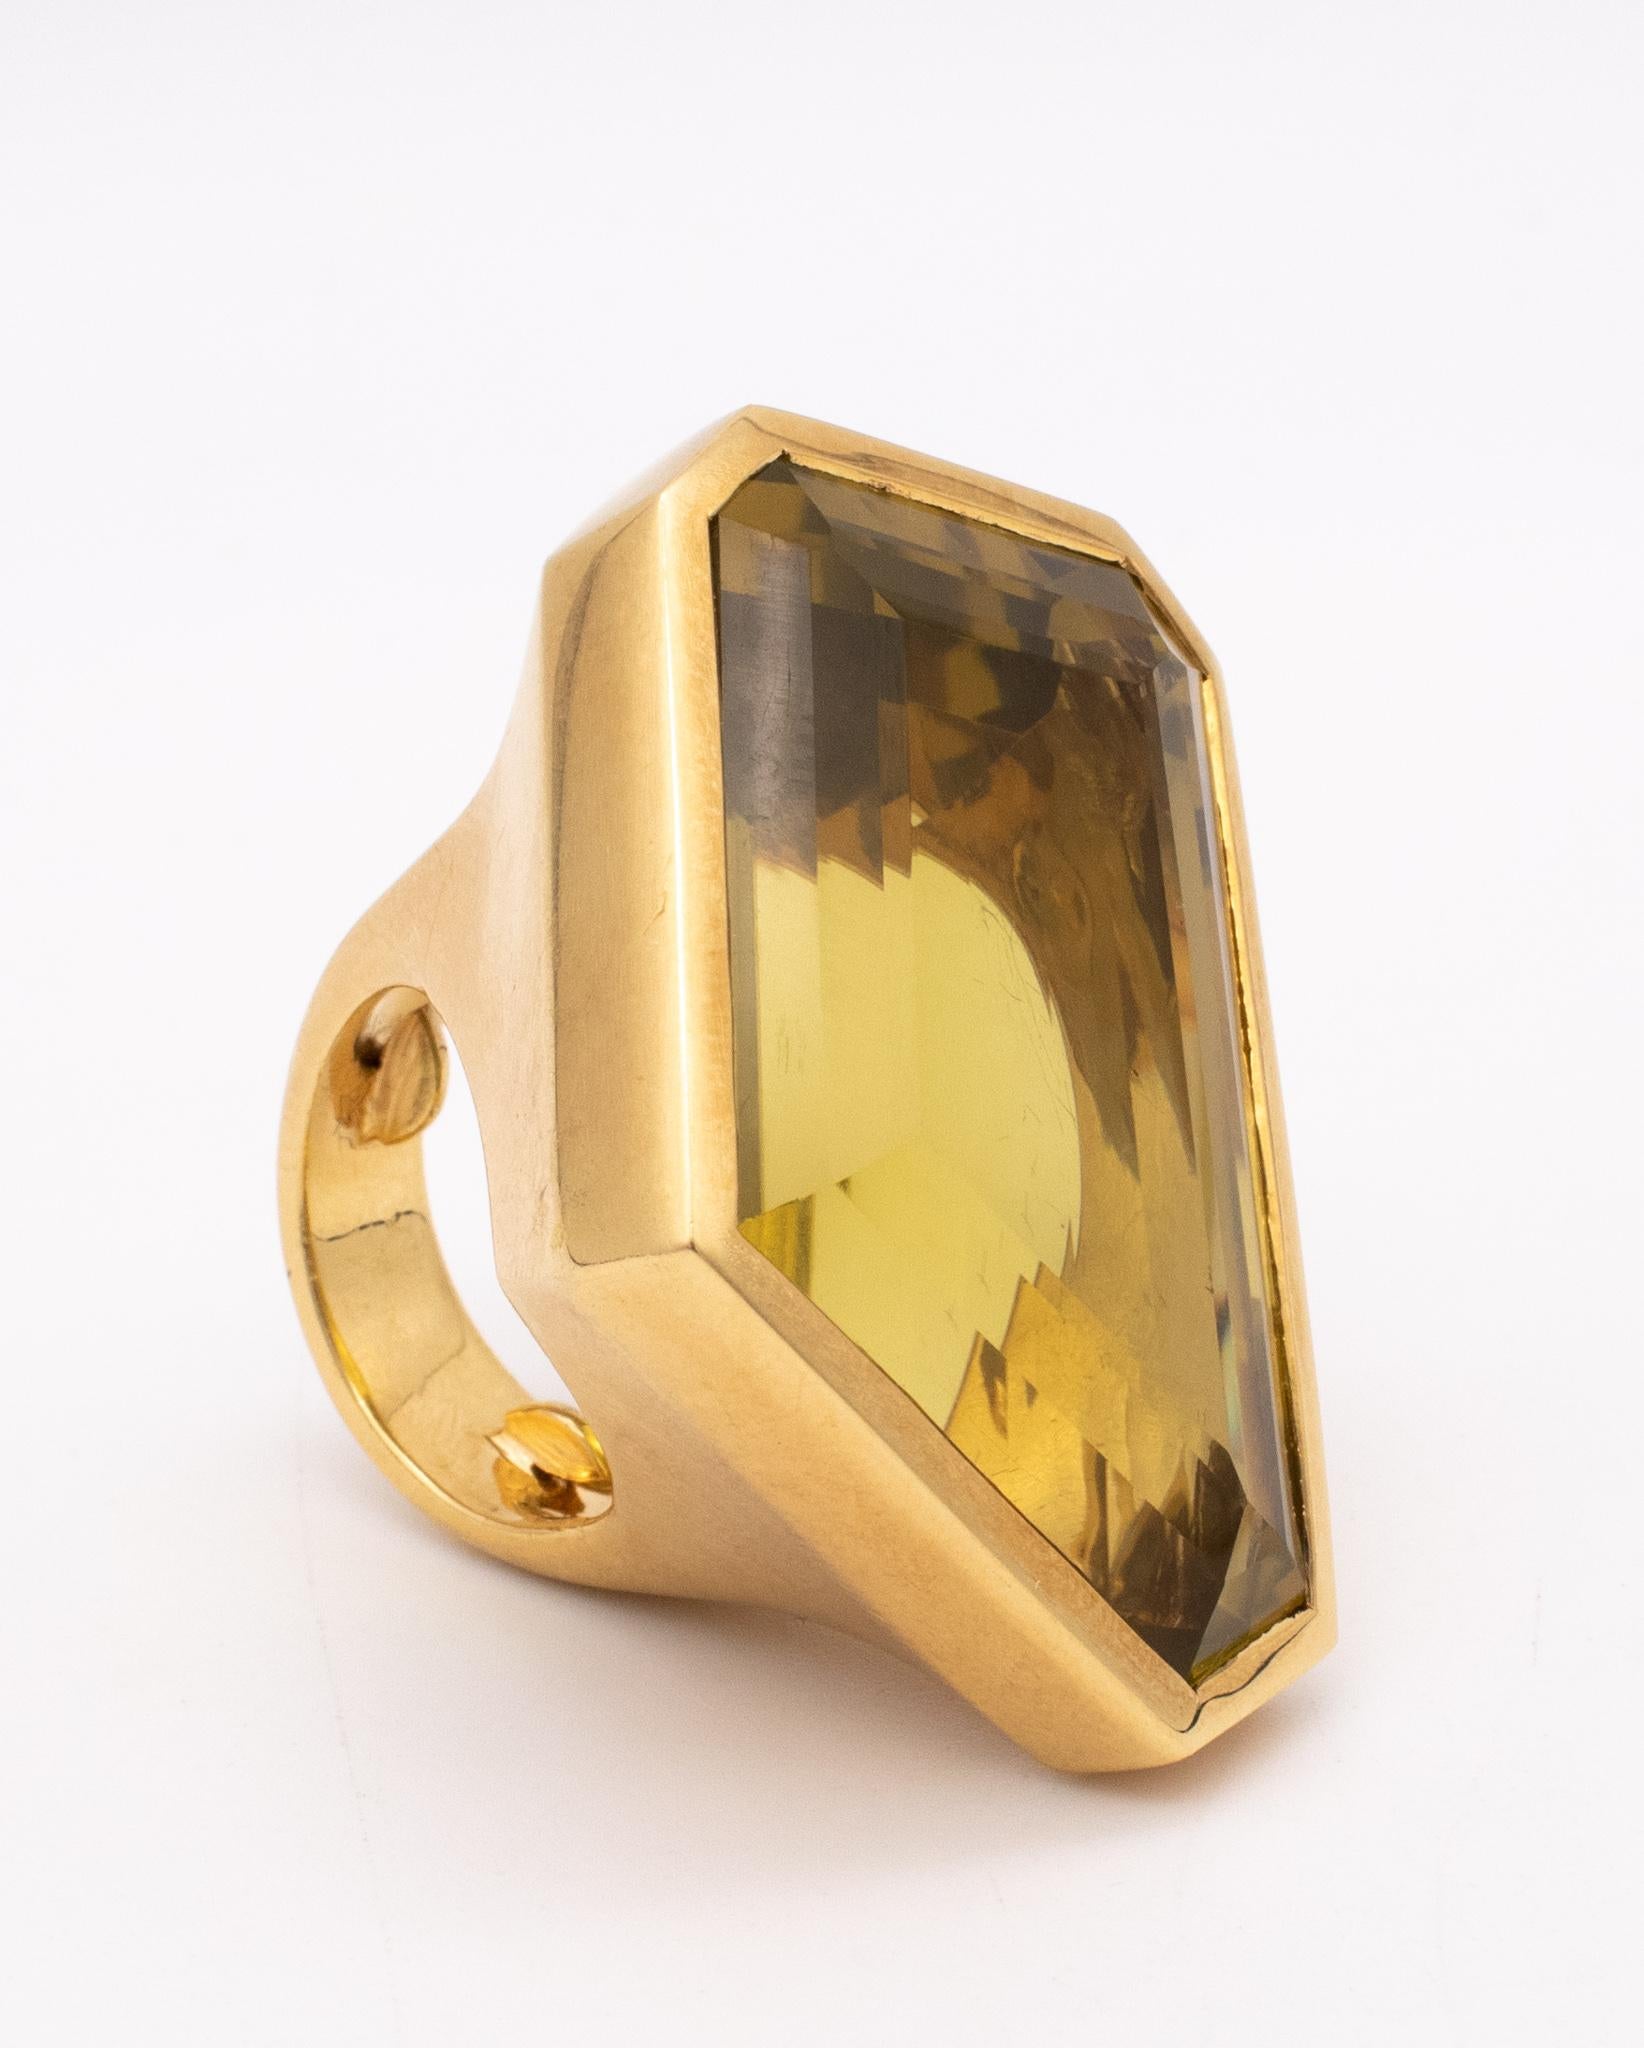 Tony Duquette Massive Geometric Cocktail Ring 18 Karat Yellow Gold 85cts Citrine For Sale 4